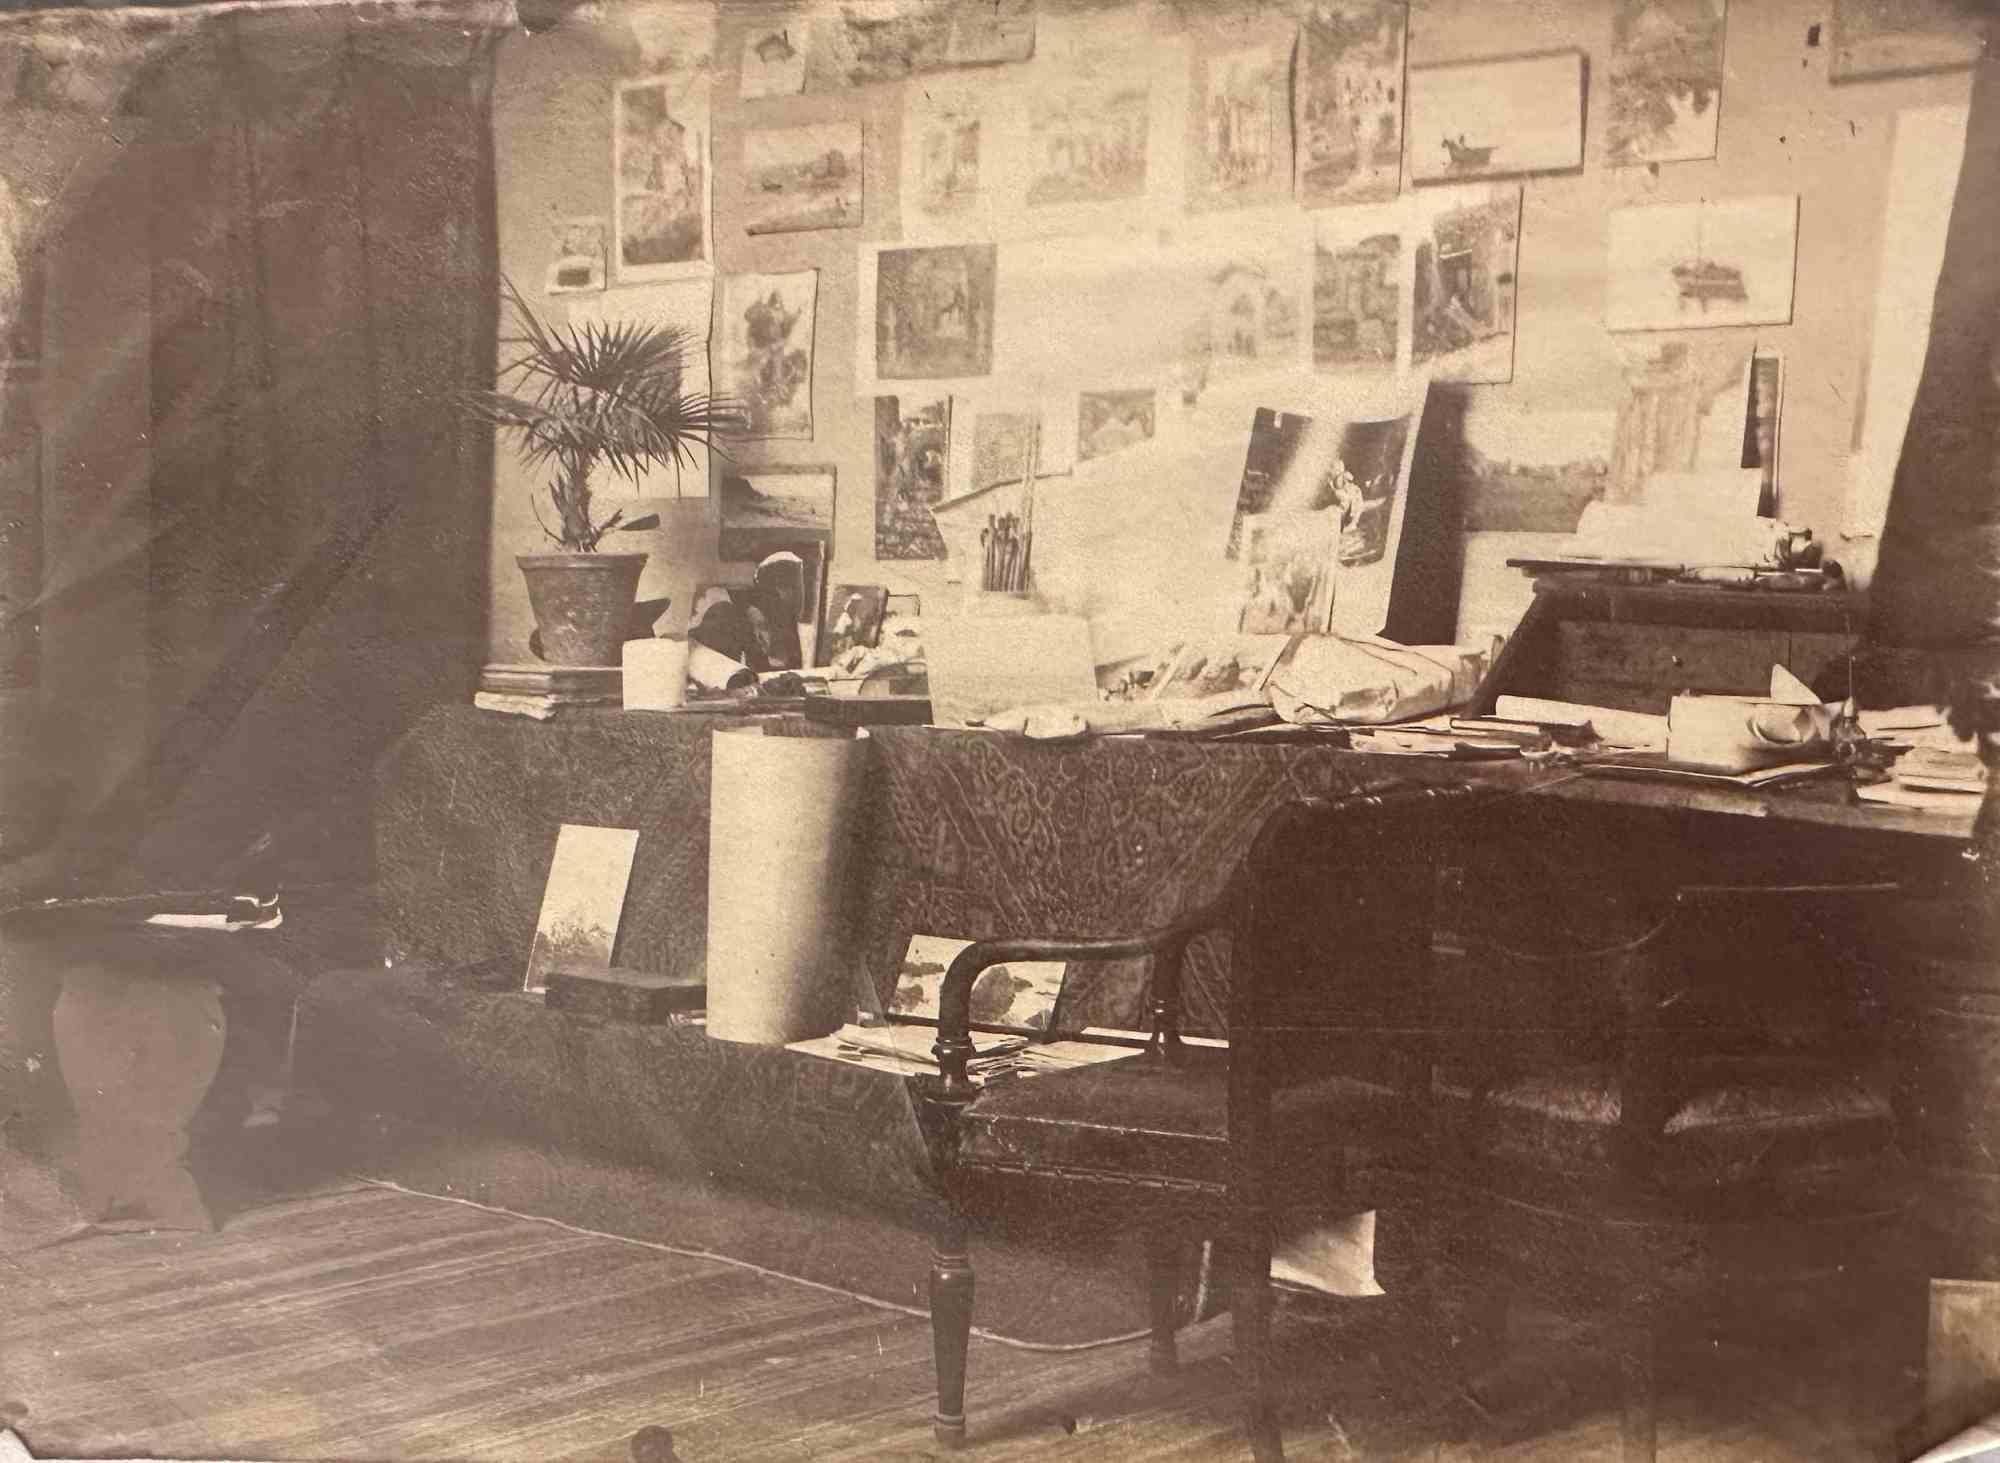 Unknown Portrait Photograph - The Old Days - Interior - Early 20th Century